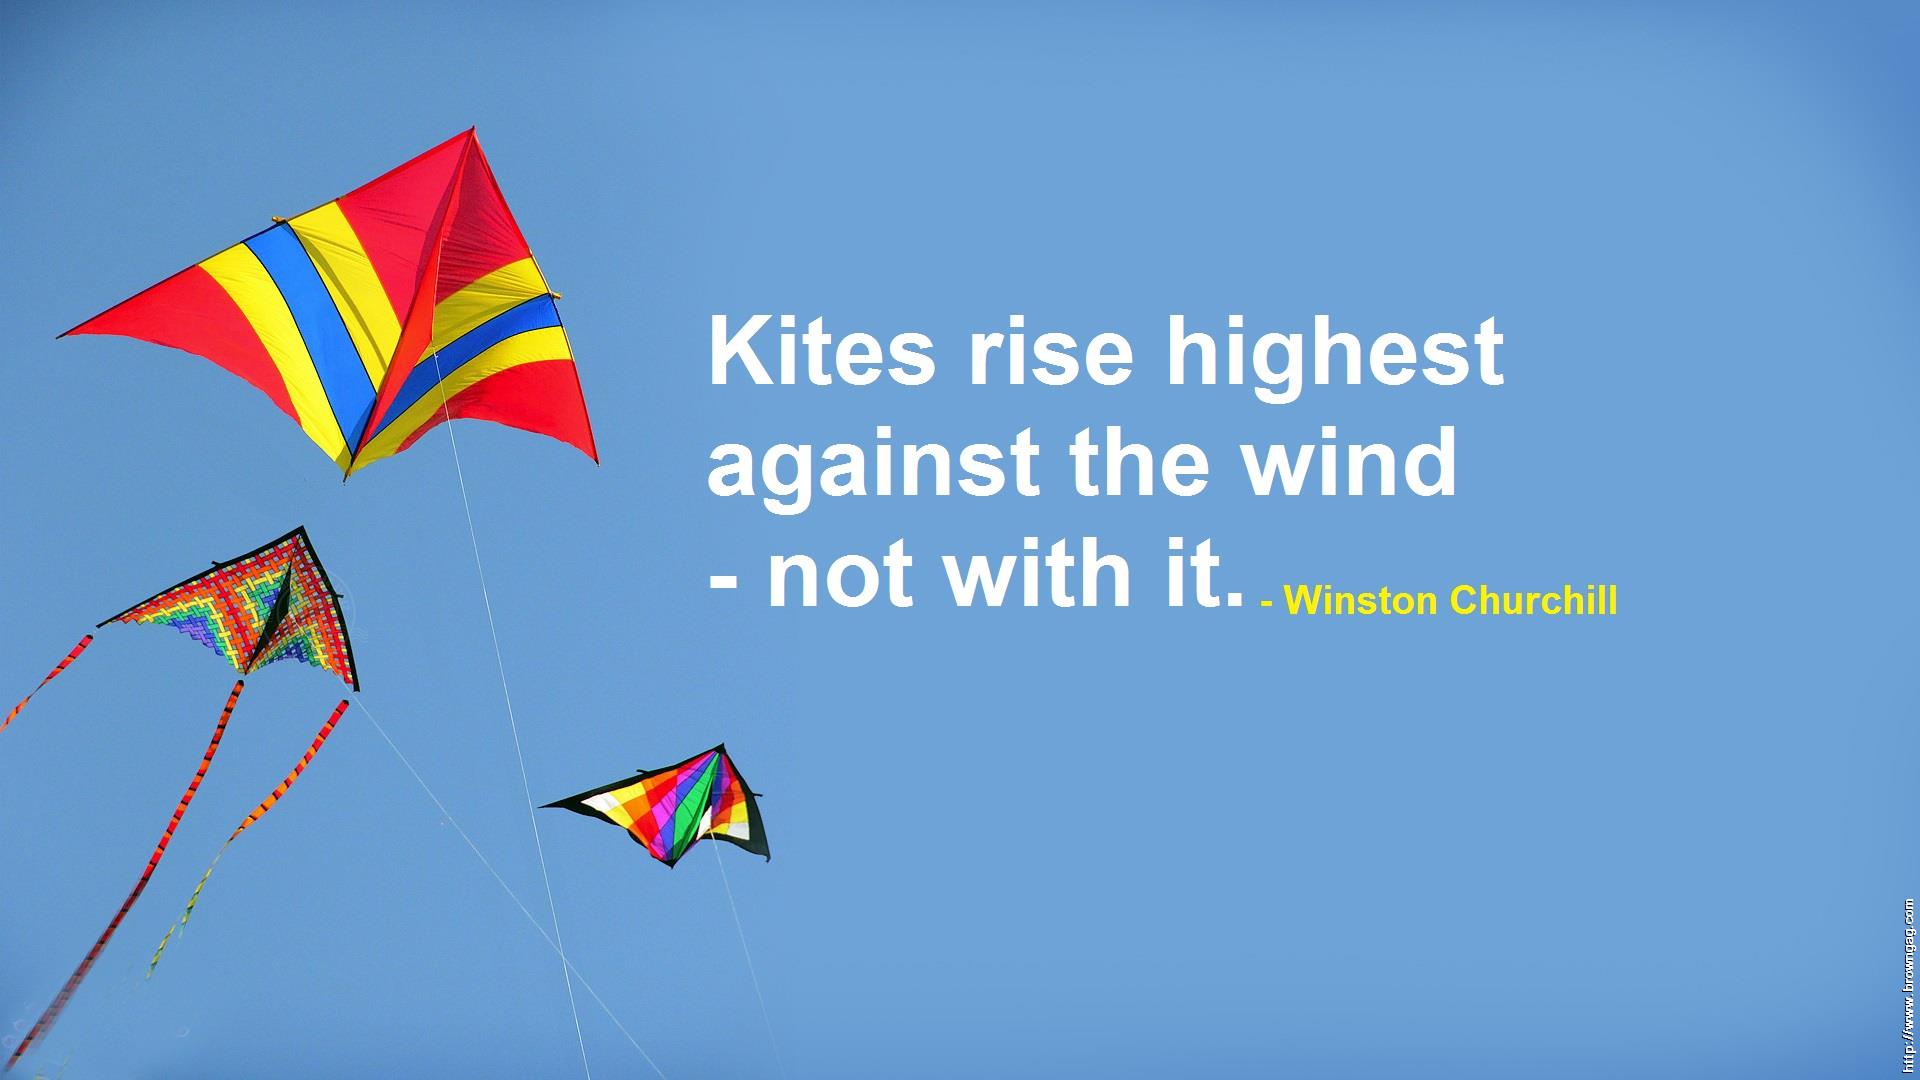 Kites rise highest against the wind - not with it. - Imgur